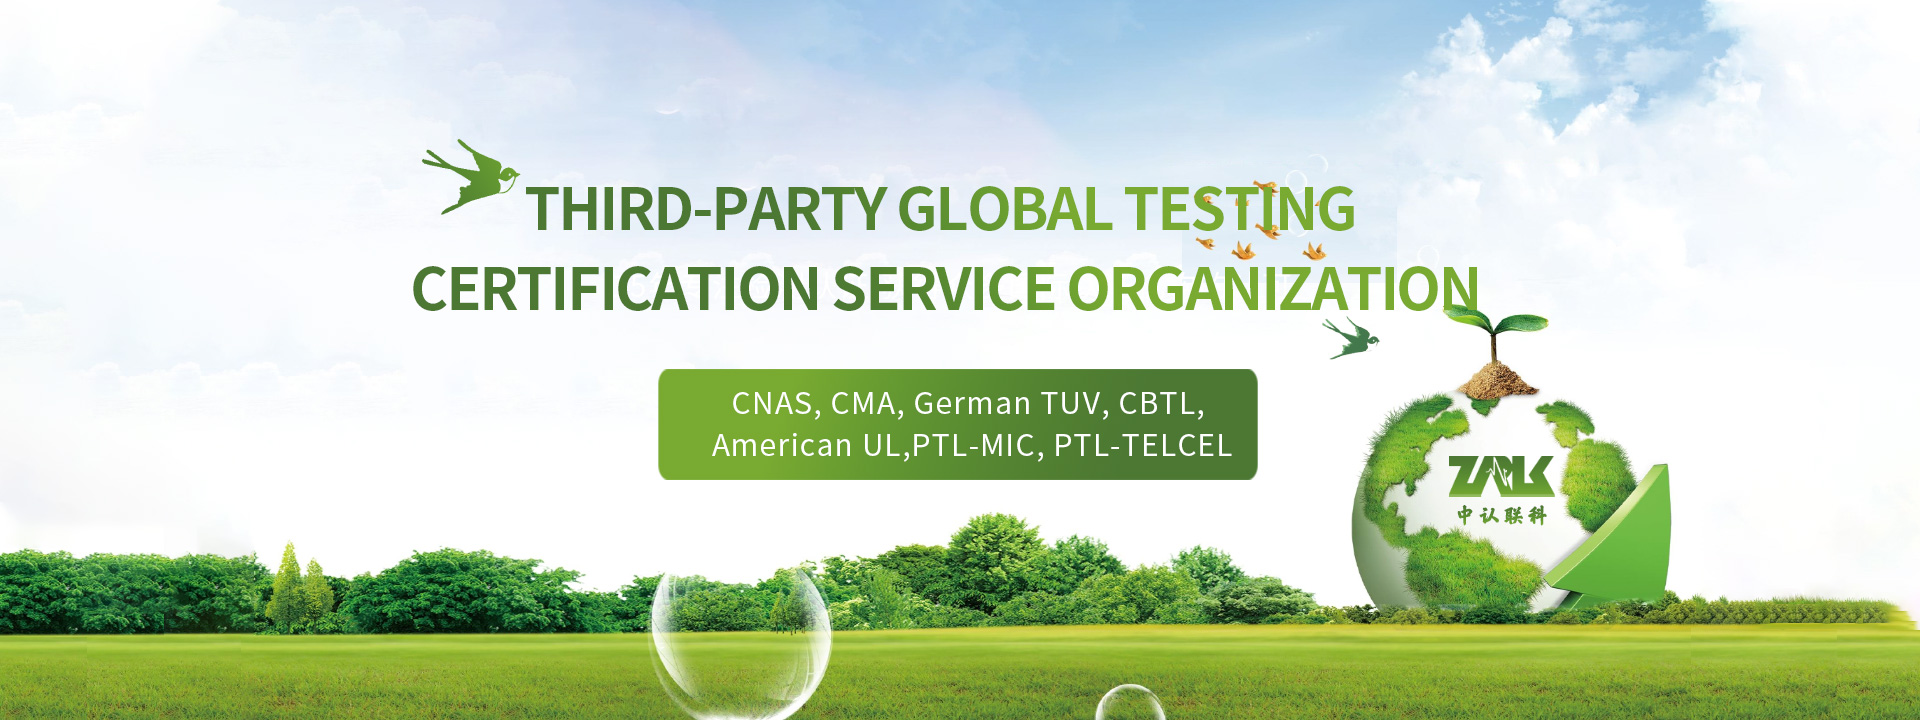 Third-party global testing cer